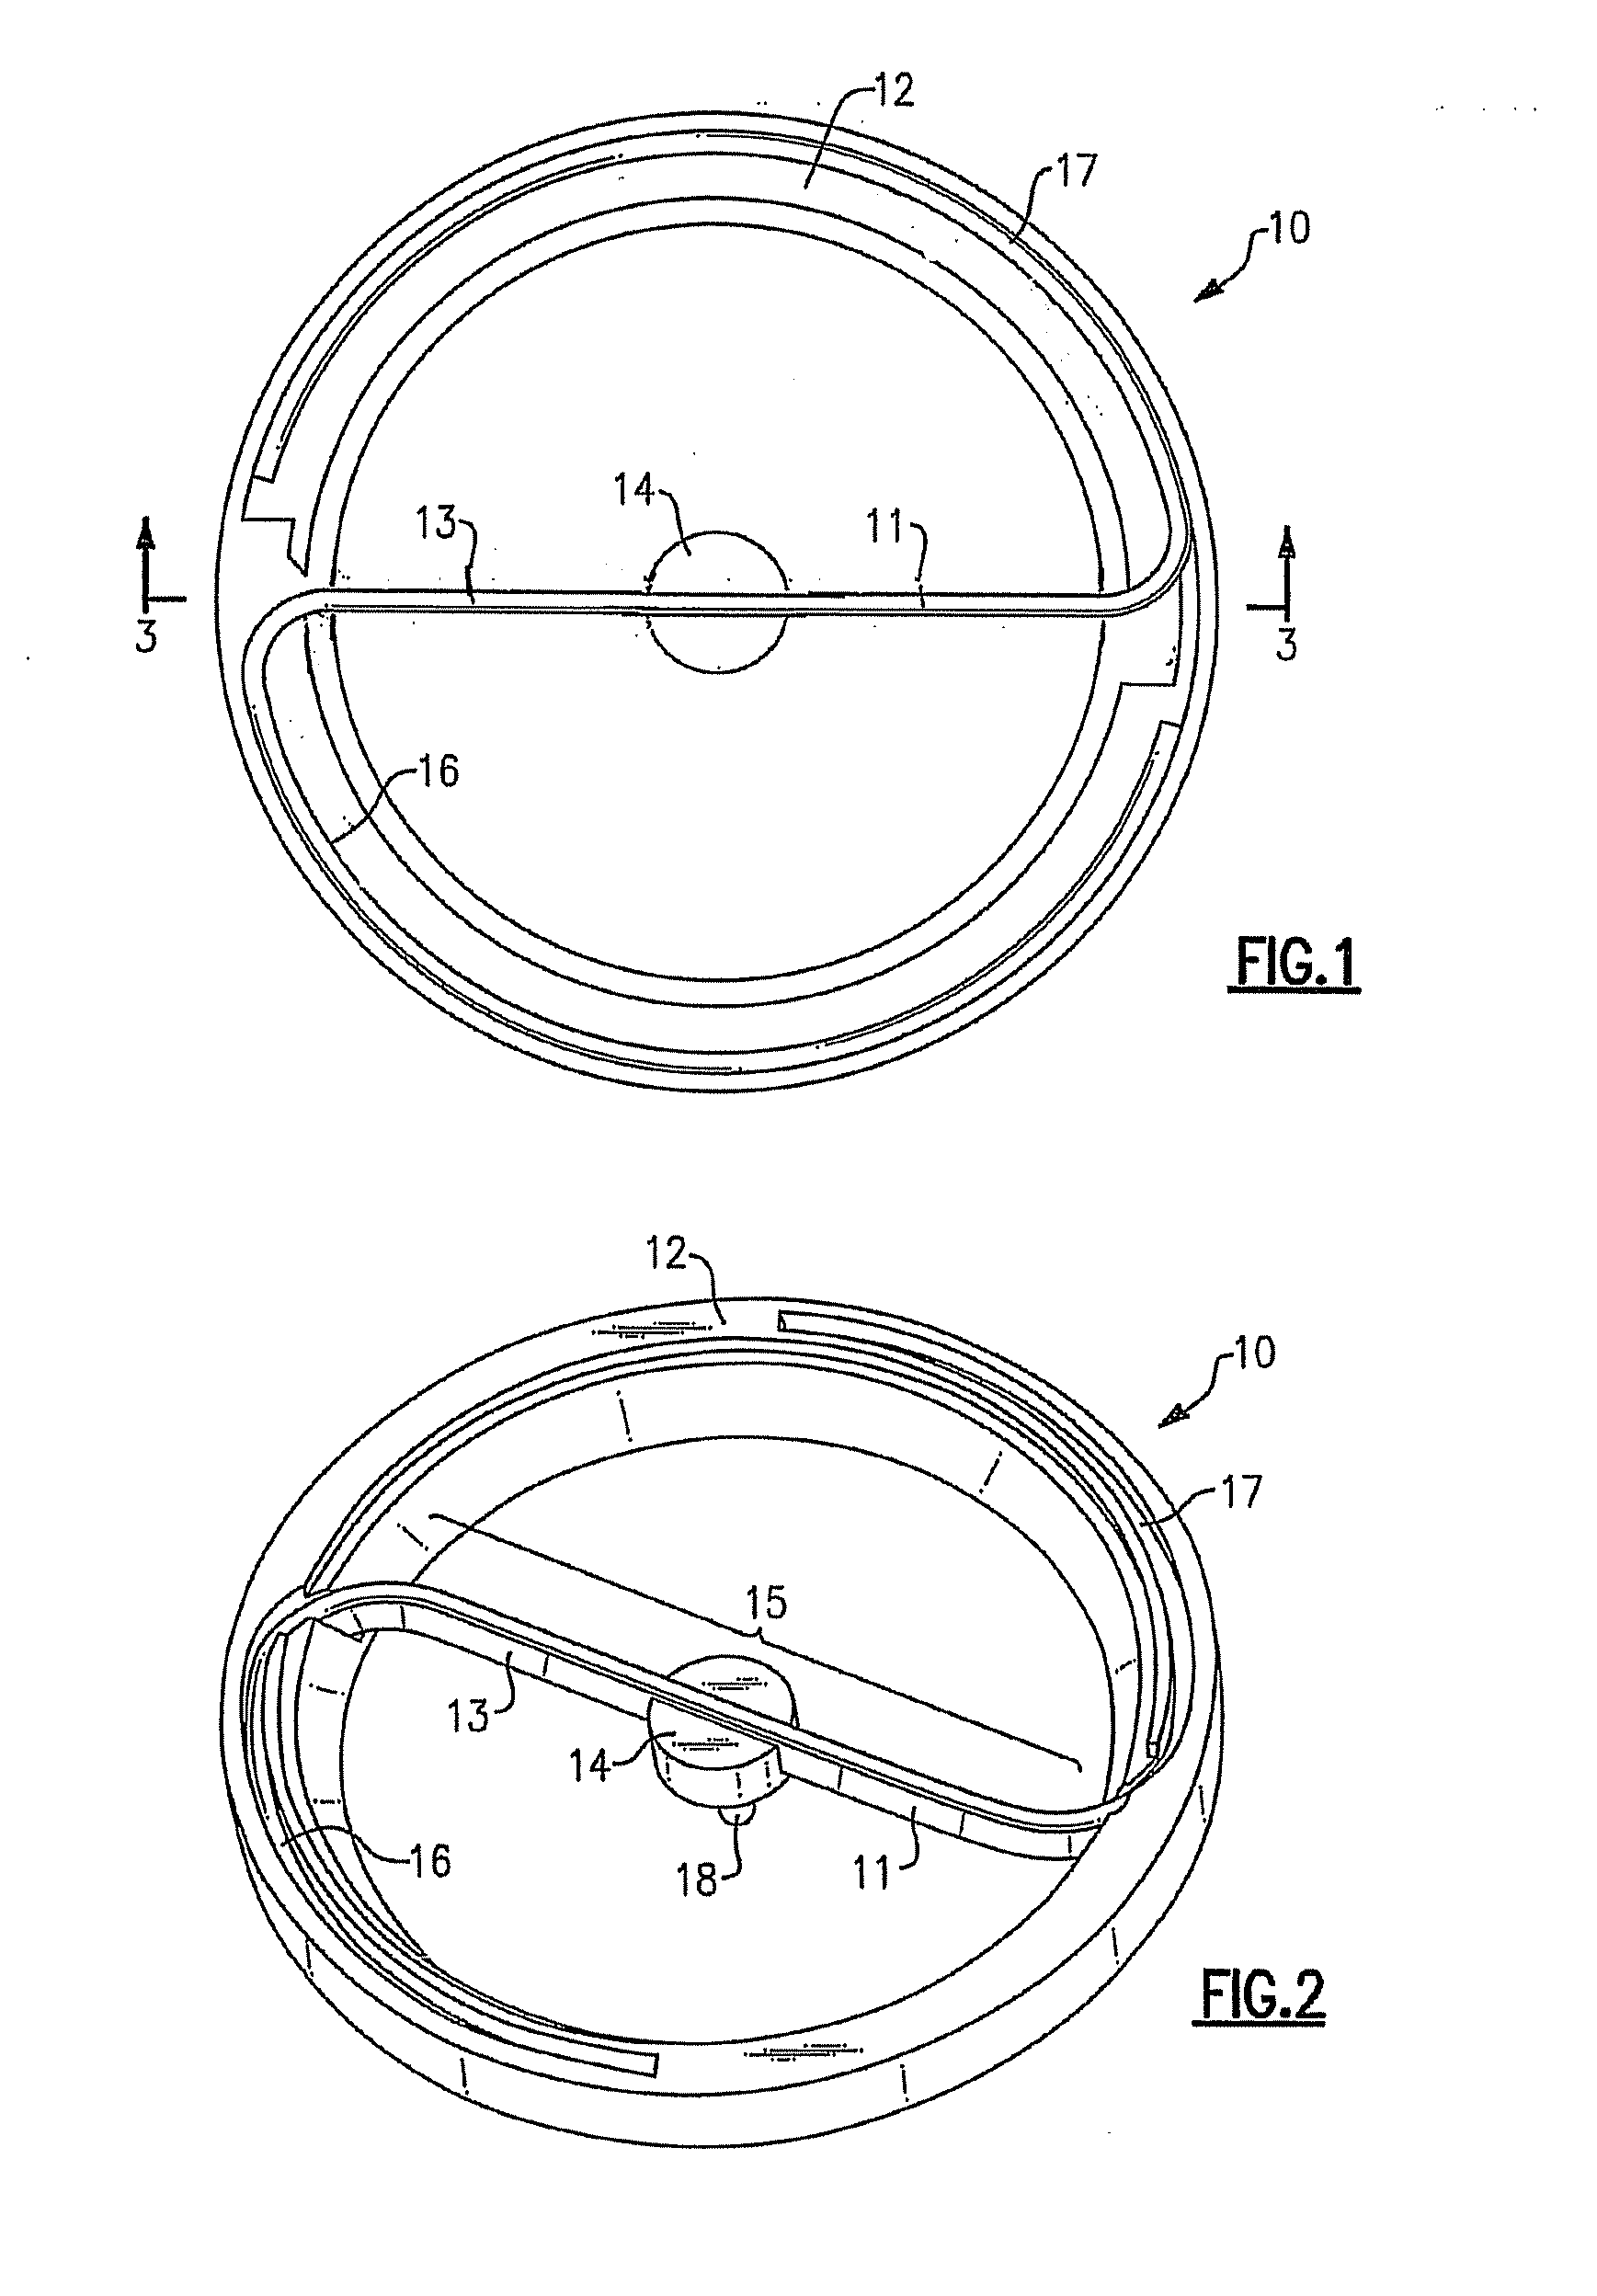 Lighting device, heat transfer structure and heat transfer element